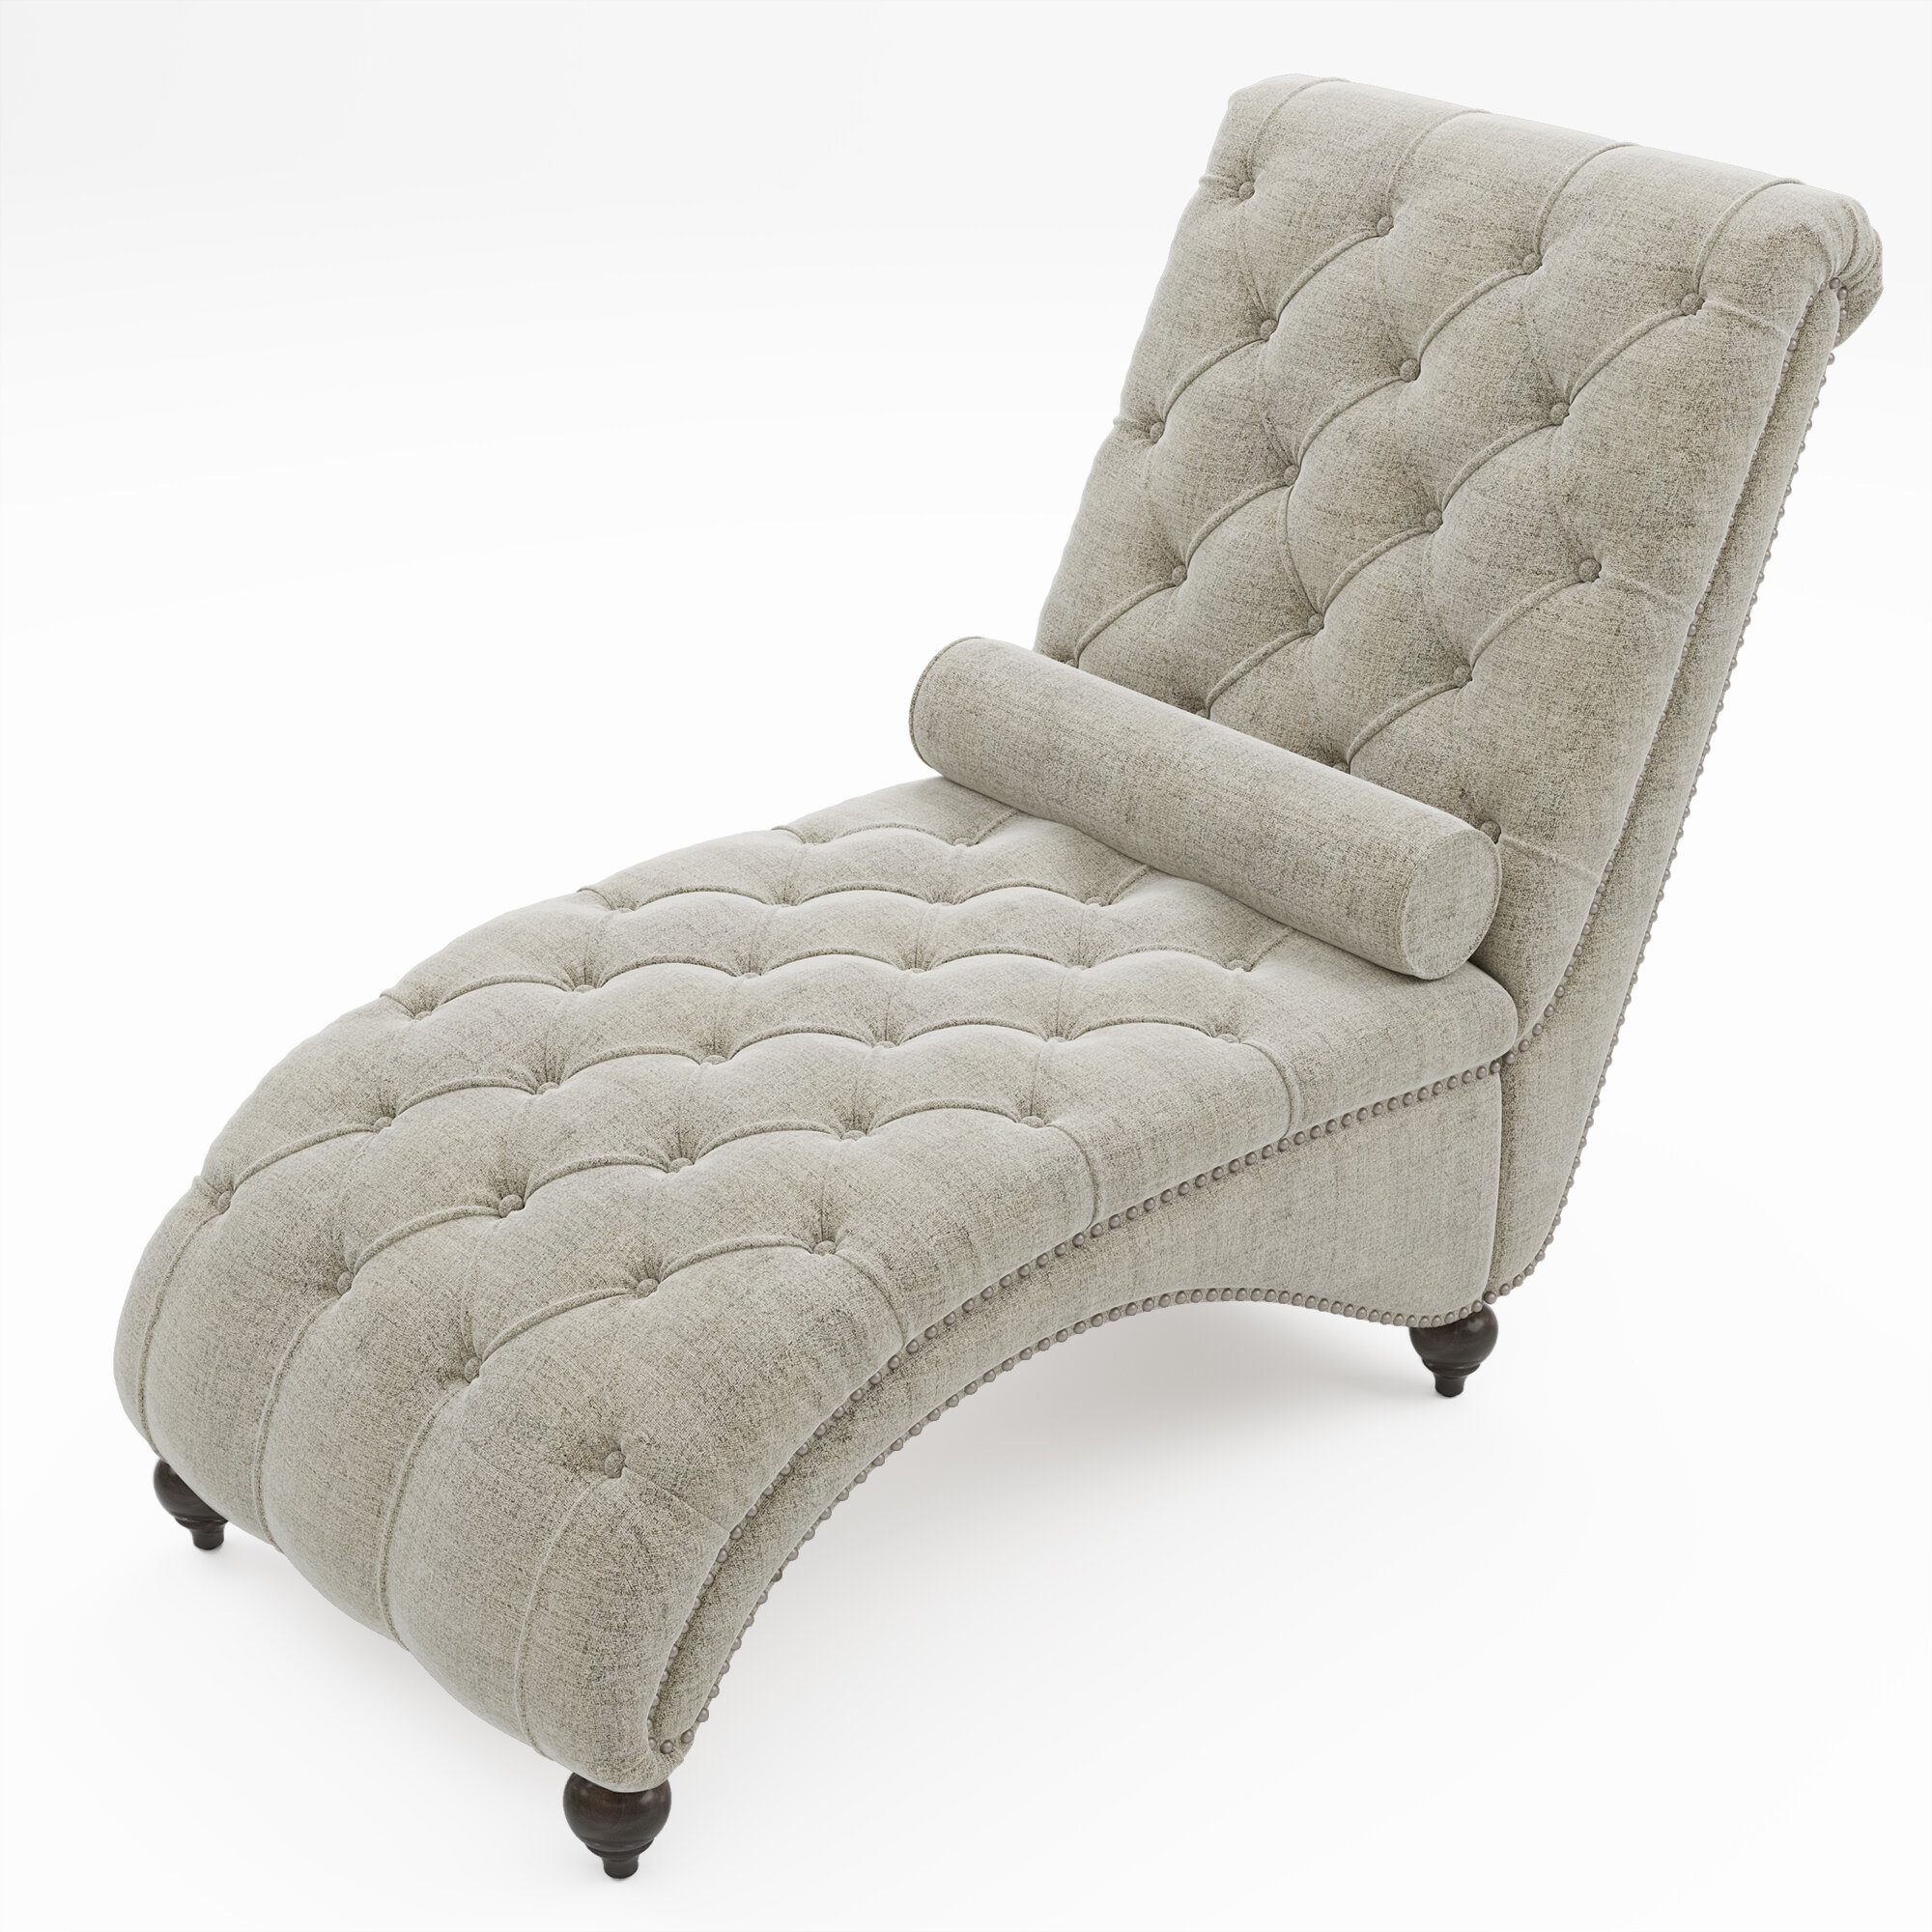 Darby Home Co Chaise Lounge Chair Linen Tufted Chaise Lounge Indoor Leisure Sofa Chair Nailhead Trim For Living Room